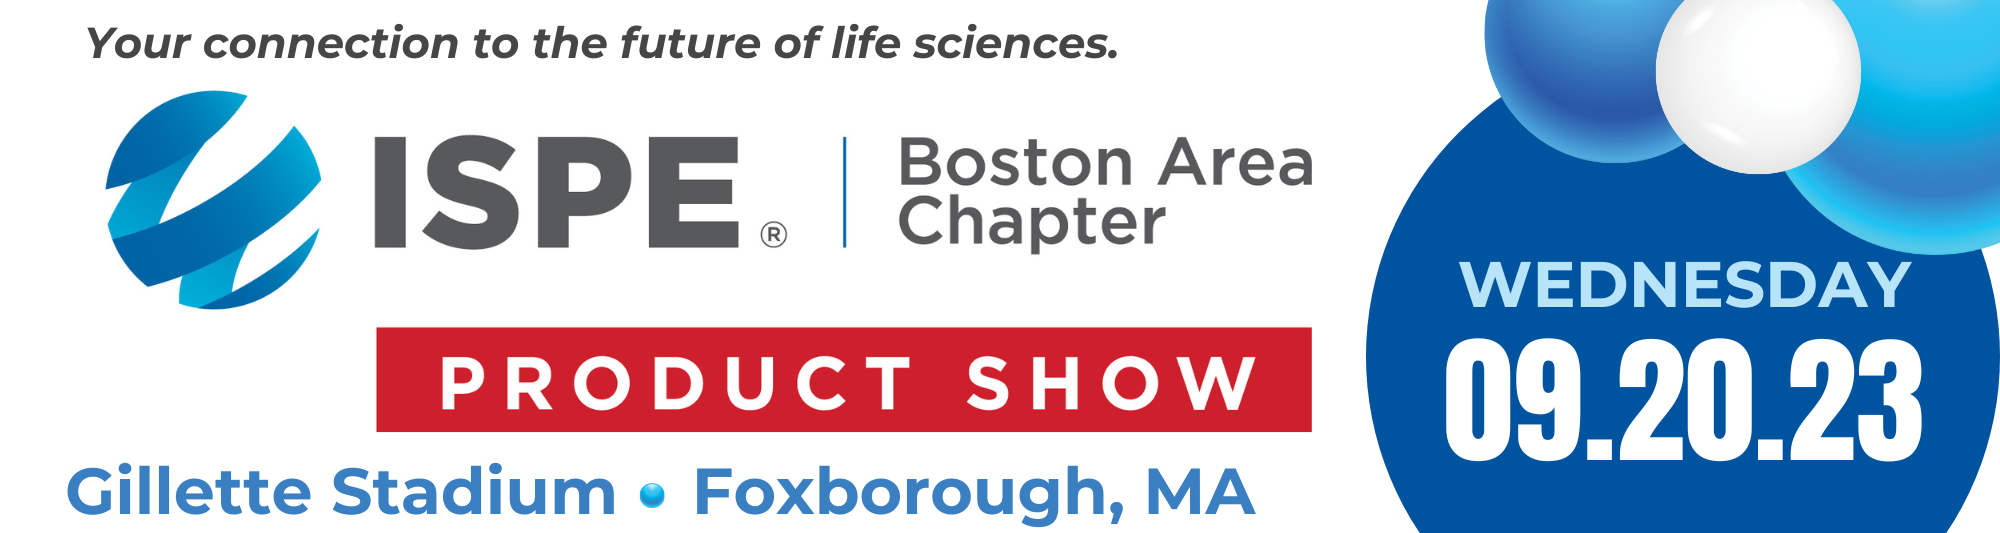 ISPE Annual Product Show and Educational Seminars @ Gillette Stadium